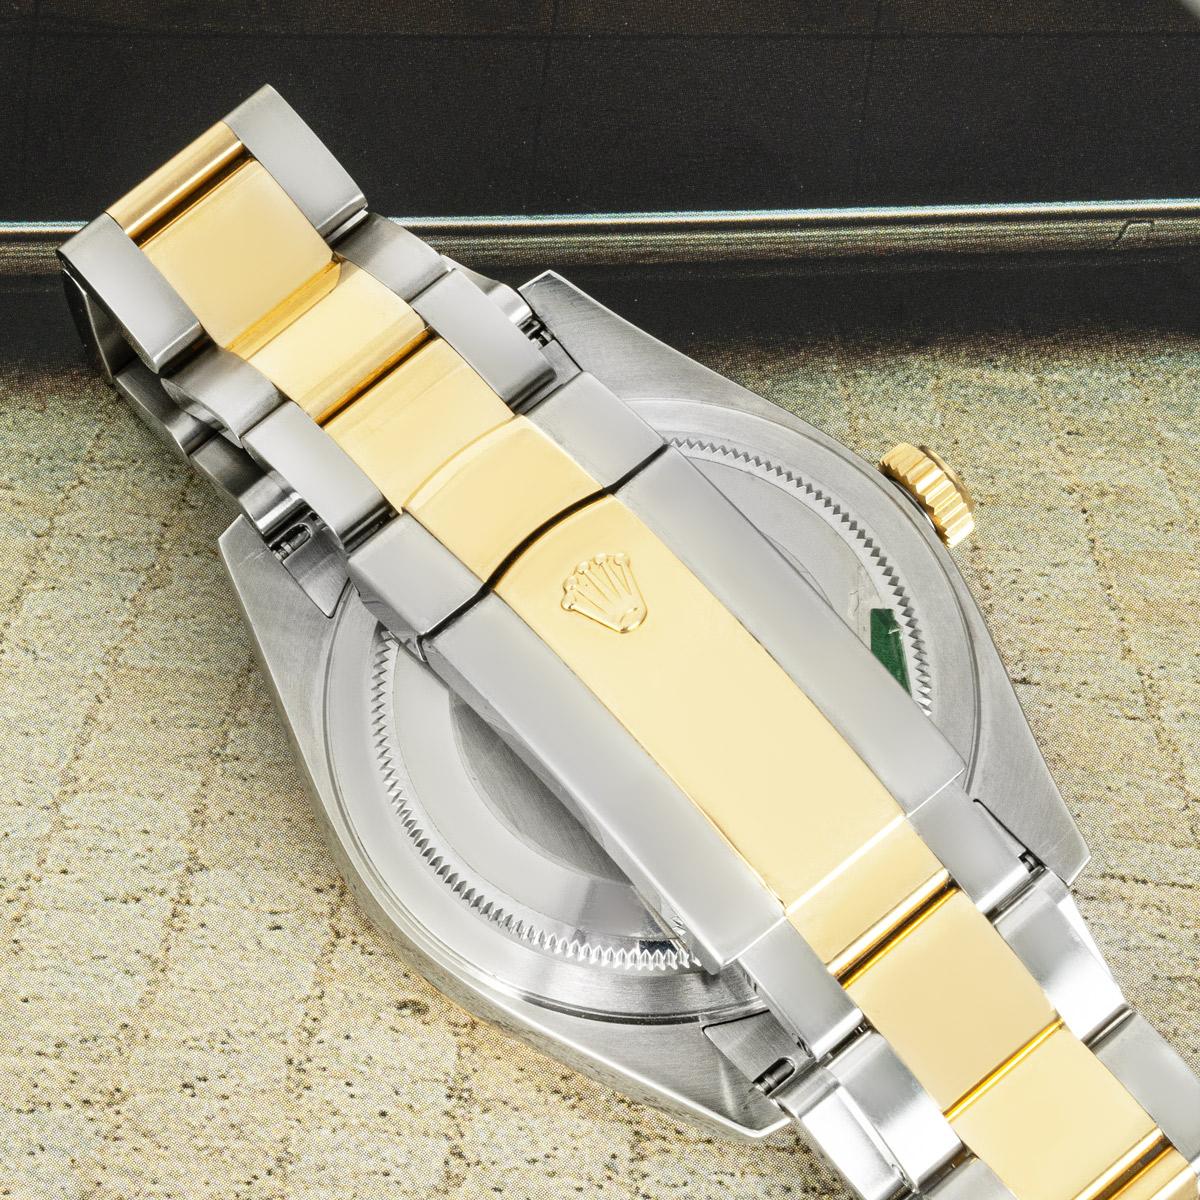 A Sky-Dweller in stainless steel and yellow gold by Rolex. Featuring a champagne dial with applied hour markers, a date indicator, a month display via the 12 apertures, a 24-hour display and a second time zone, which can be set using the fluted